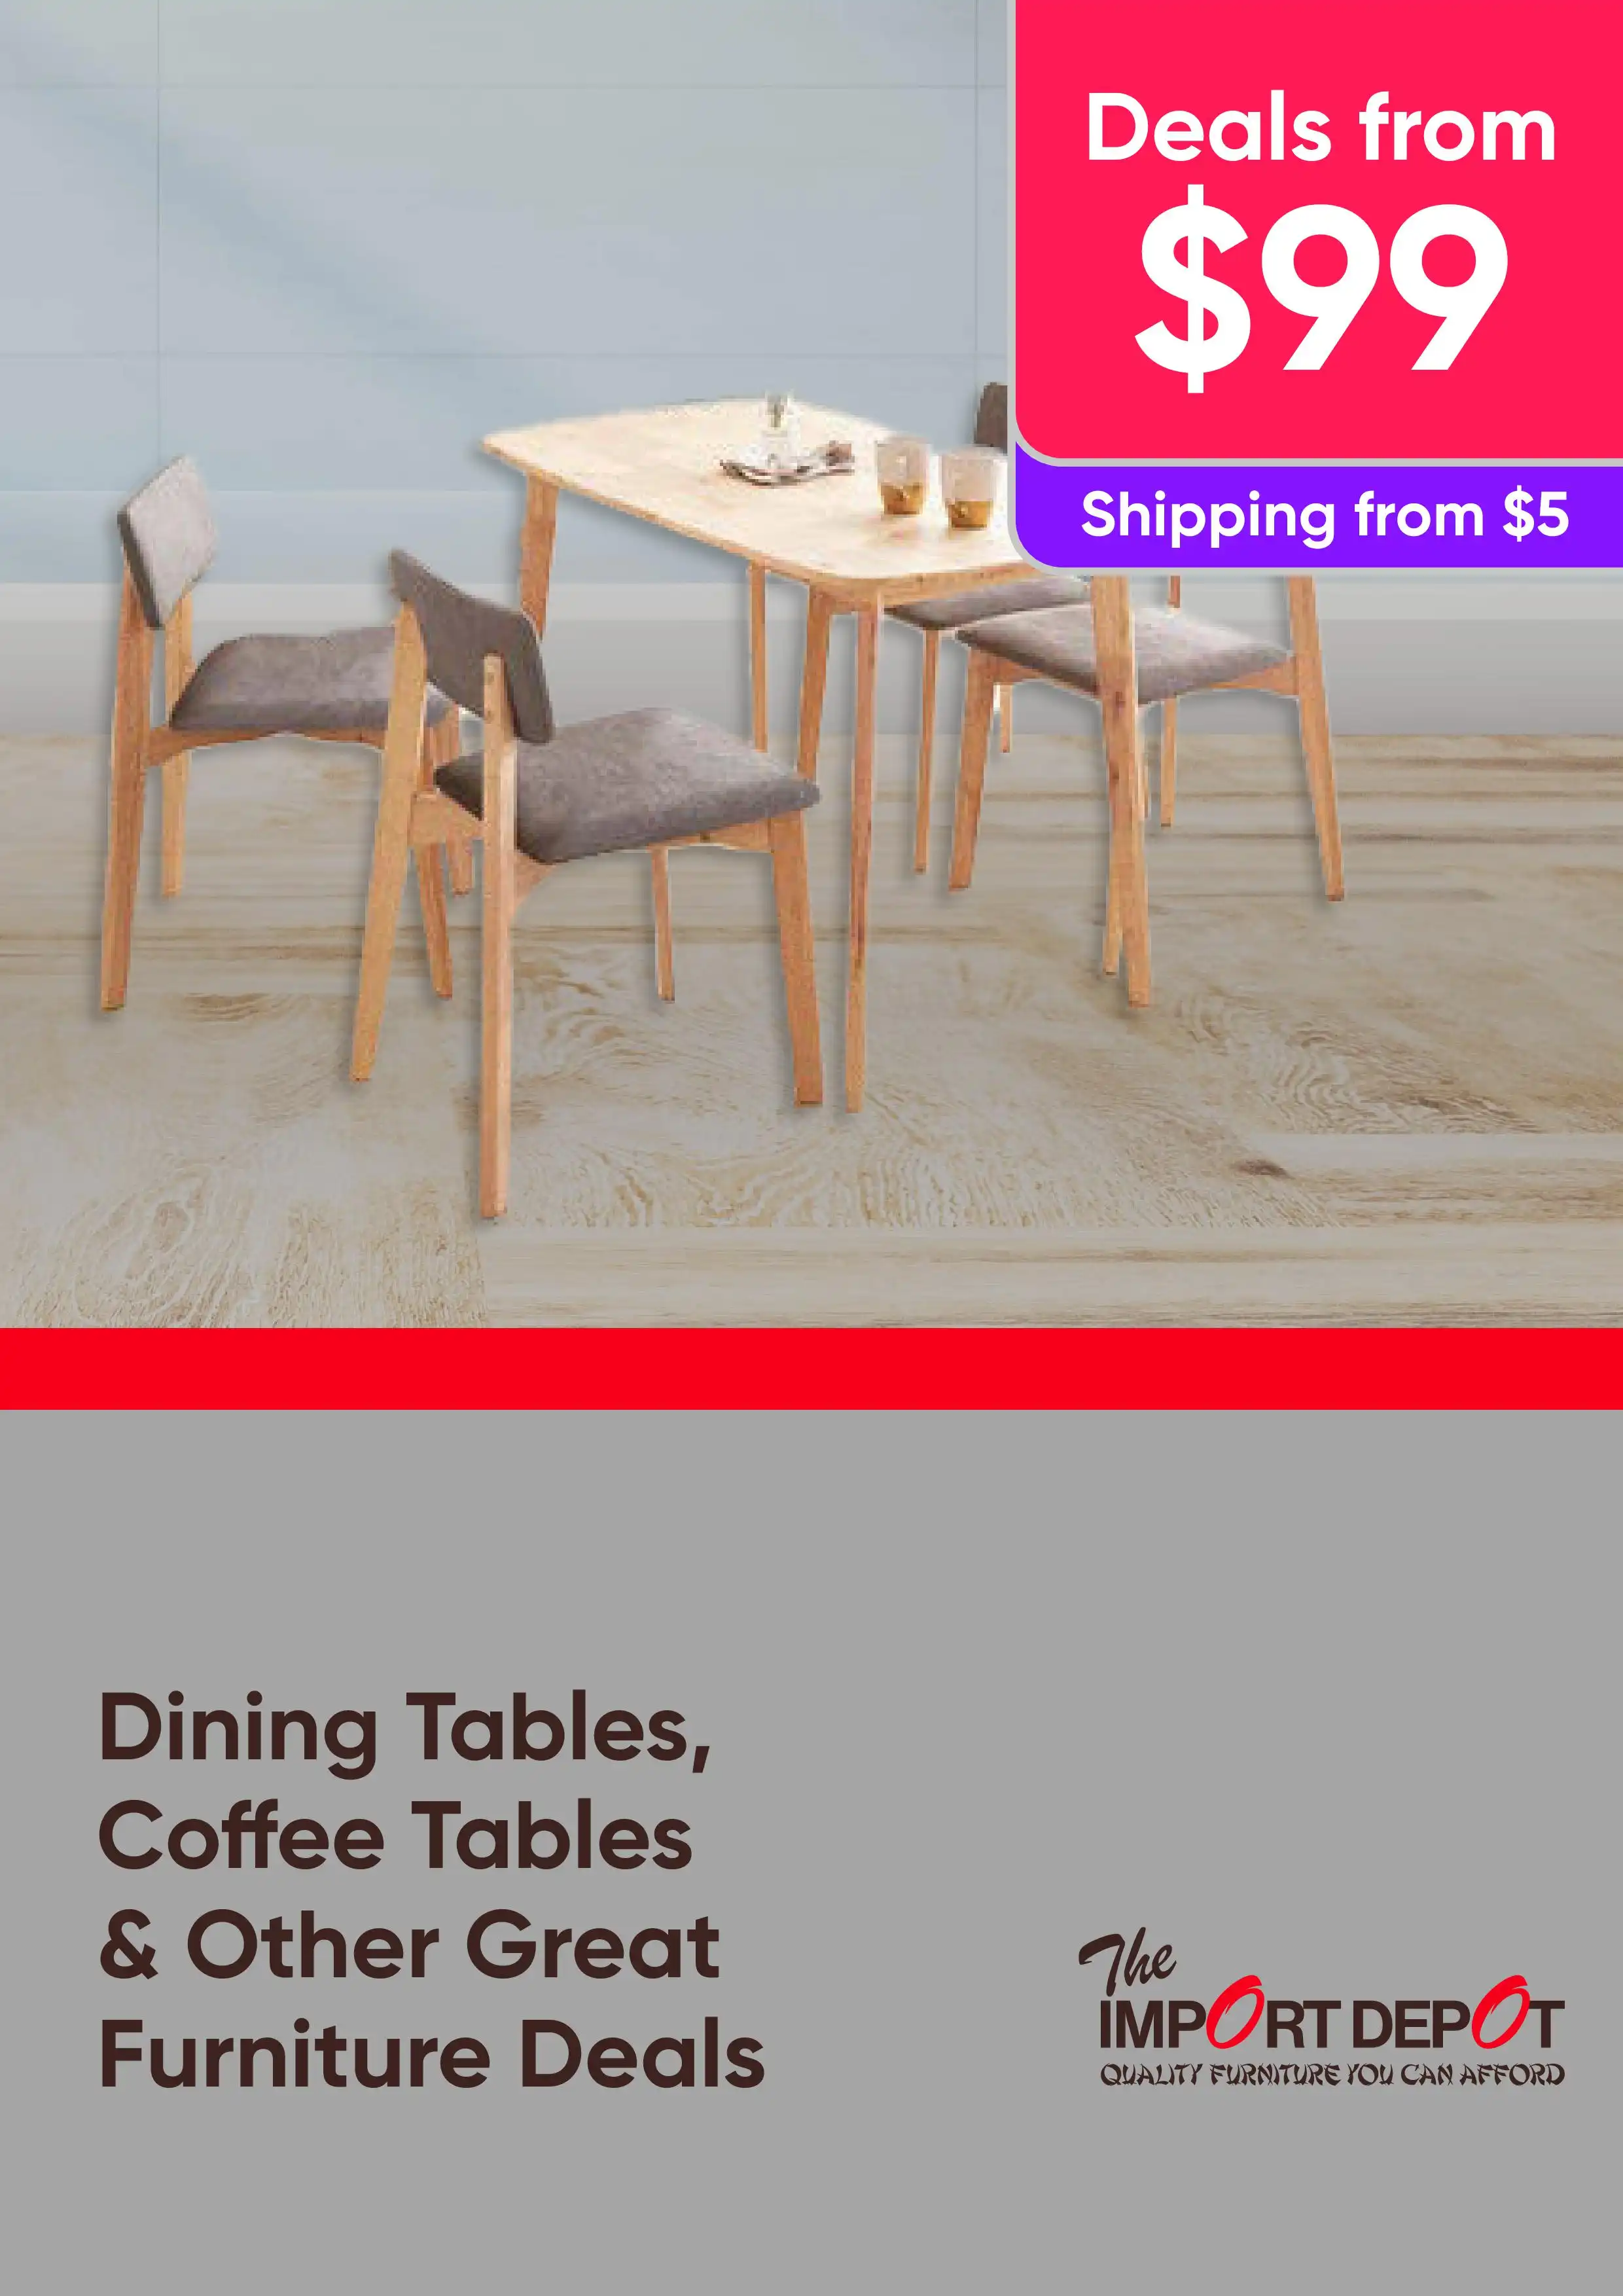 Dining Tables, Coffee Tables & Other Great Furniture Deals